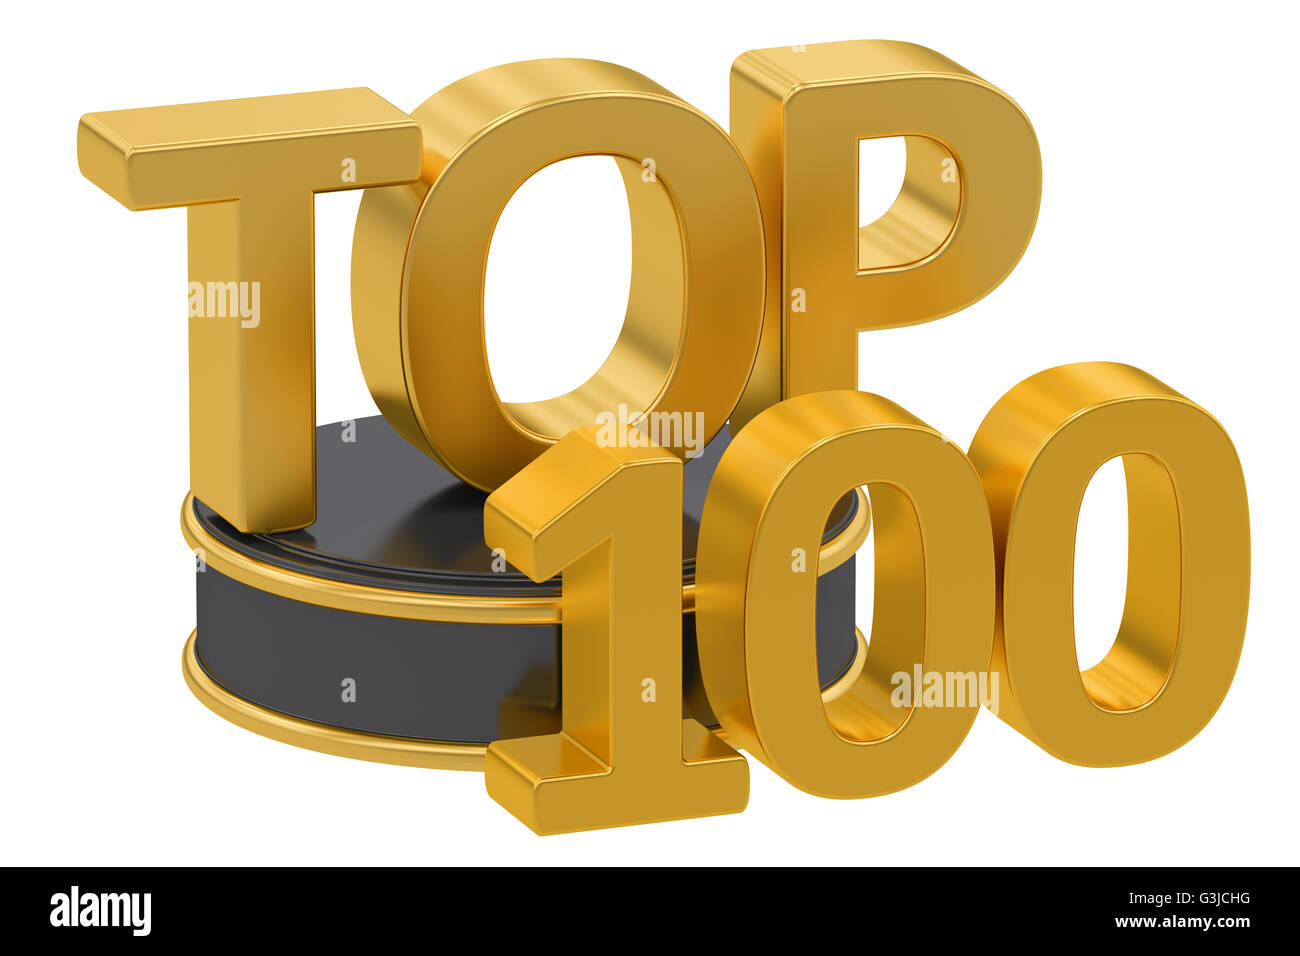 Top 100, 3D rendering isolated on white background Stock Photo